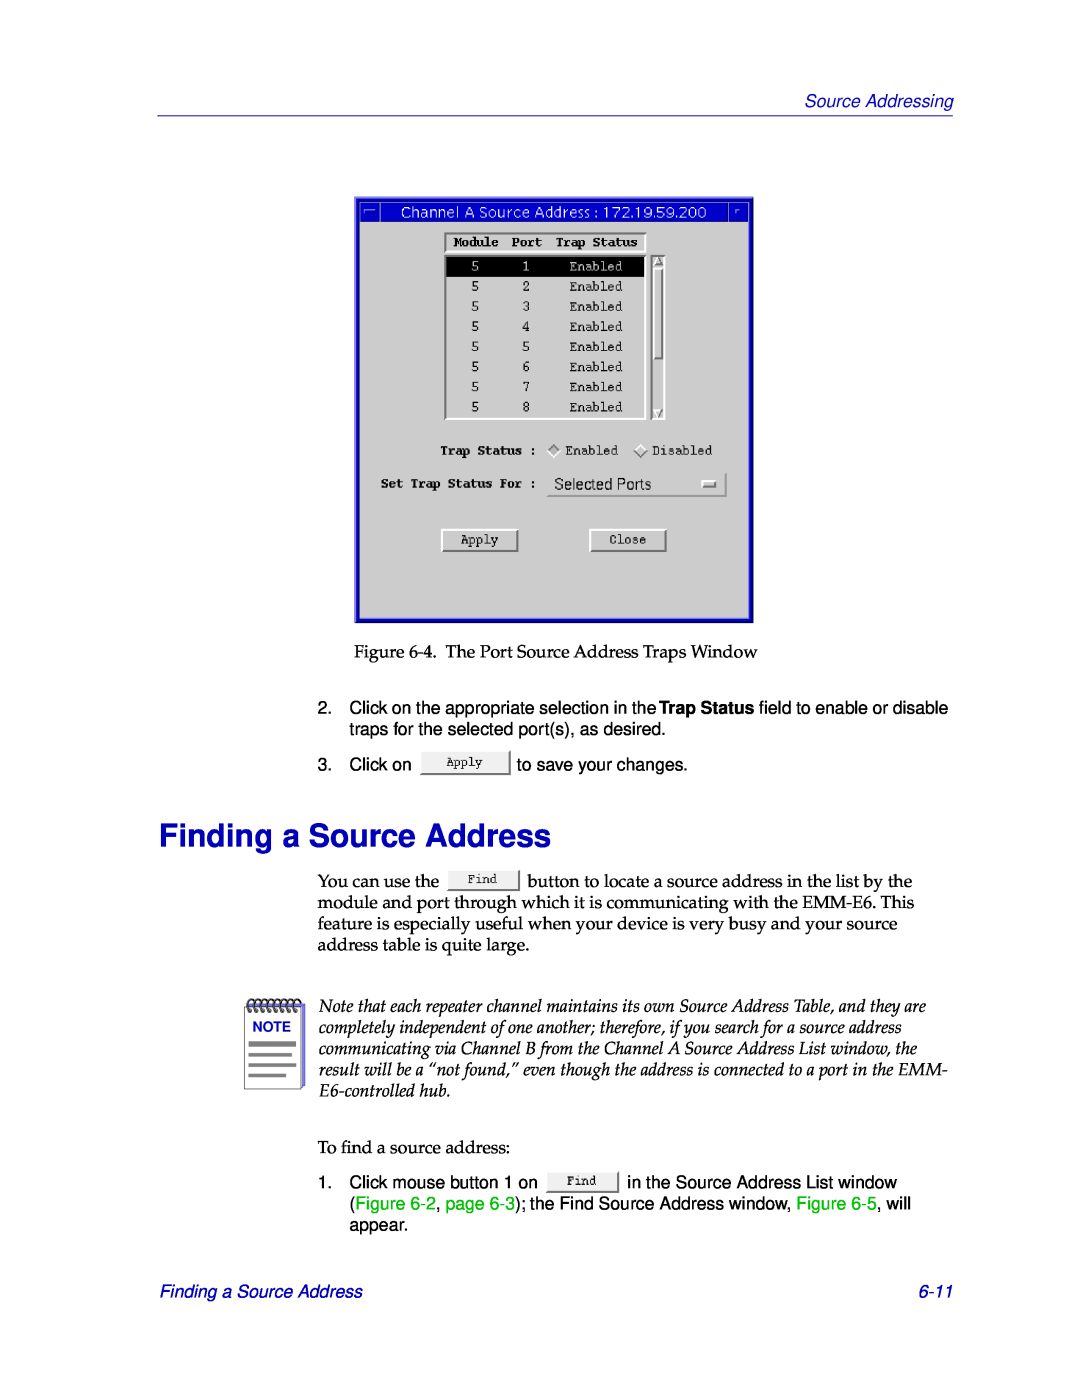 Cabletron Systems EMM-E6 manual Finding a Source Address, 6-11, Source Addressing 